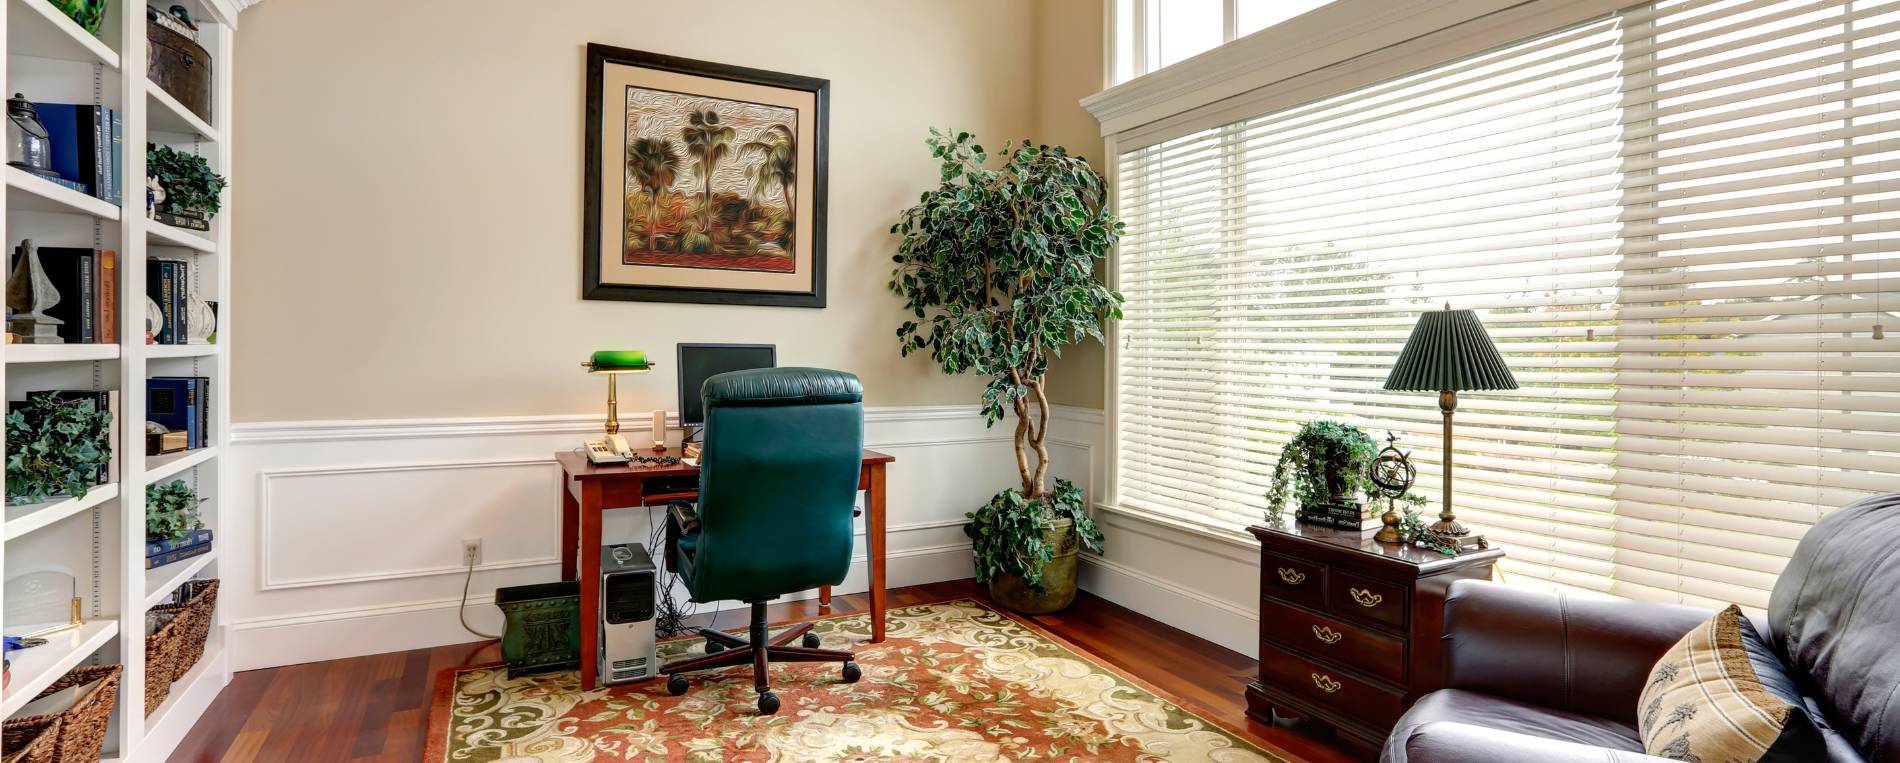 A view at a home office with a white vinyl window blinds